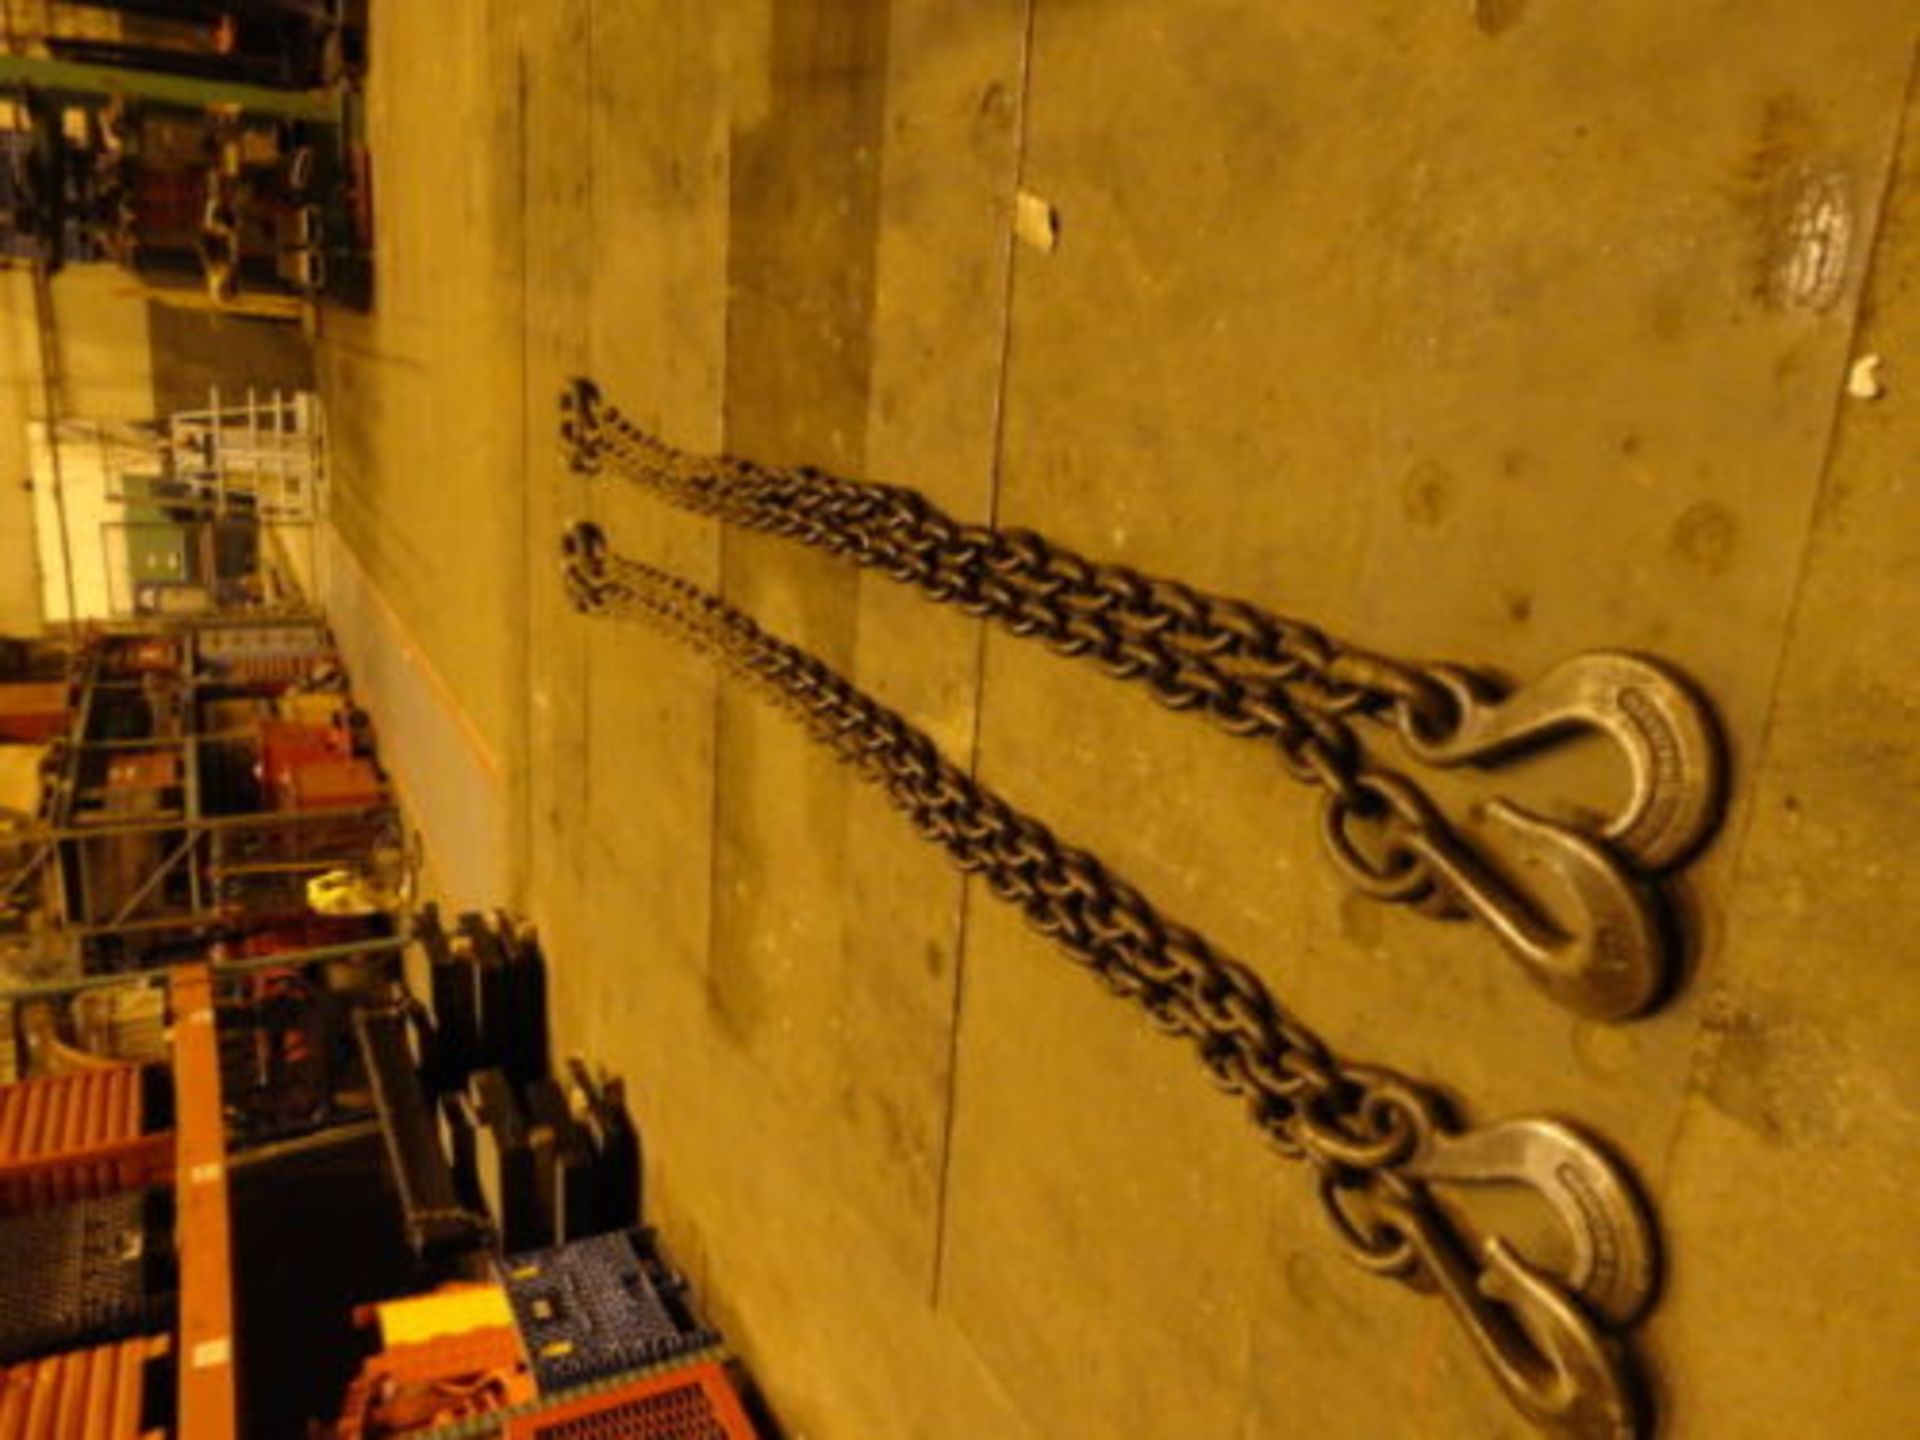 Large 4 Way Lifting Chain 16ft Long x 199,000 lbs - Image 2 of 3